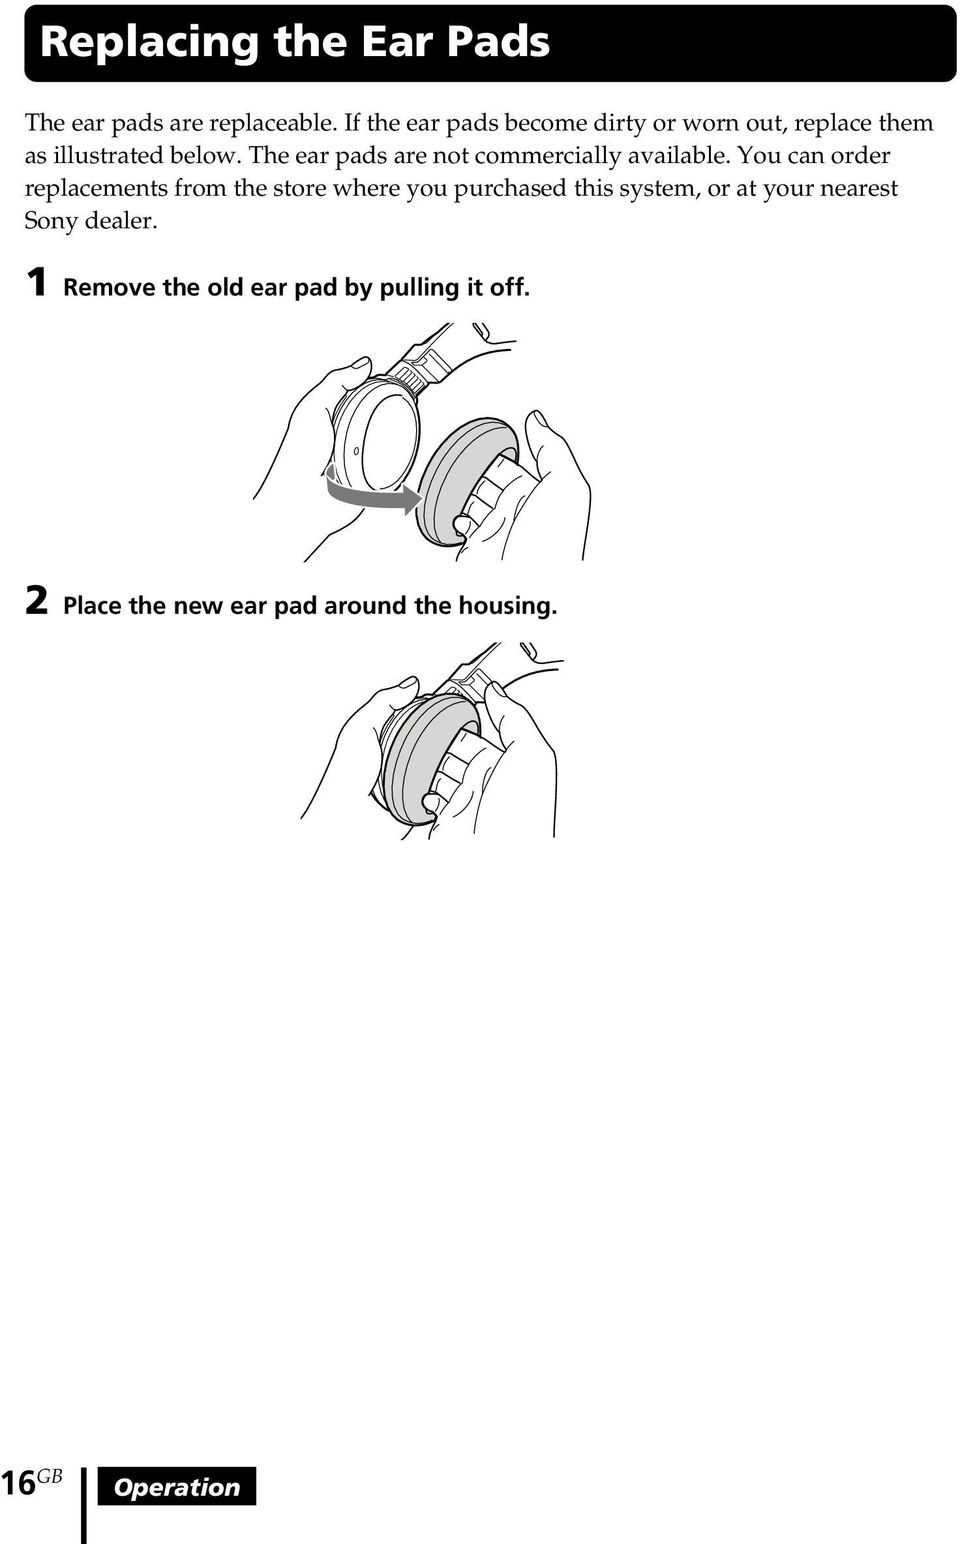 The ear pads are not commercially available.